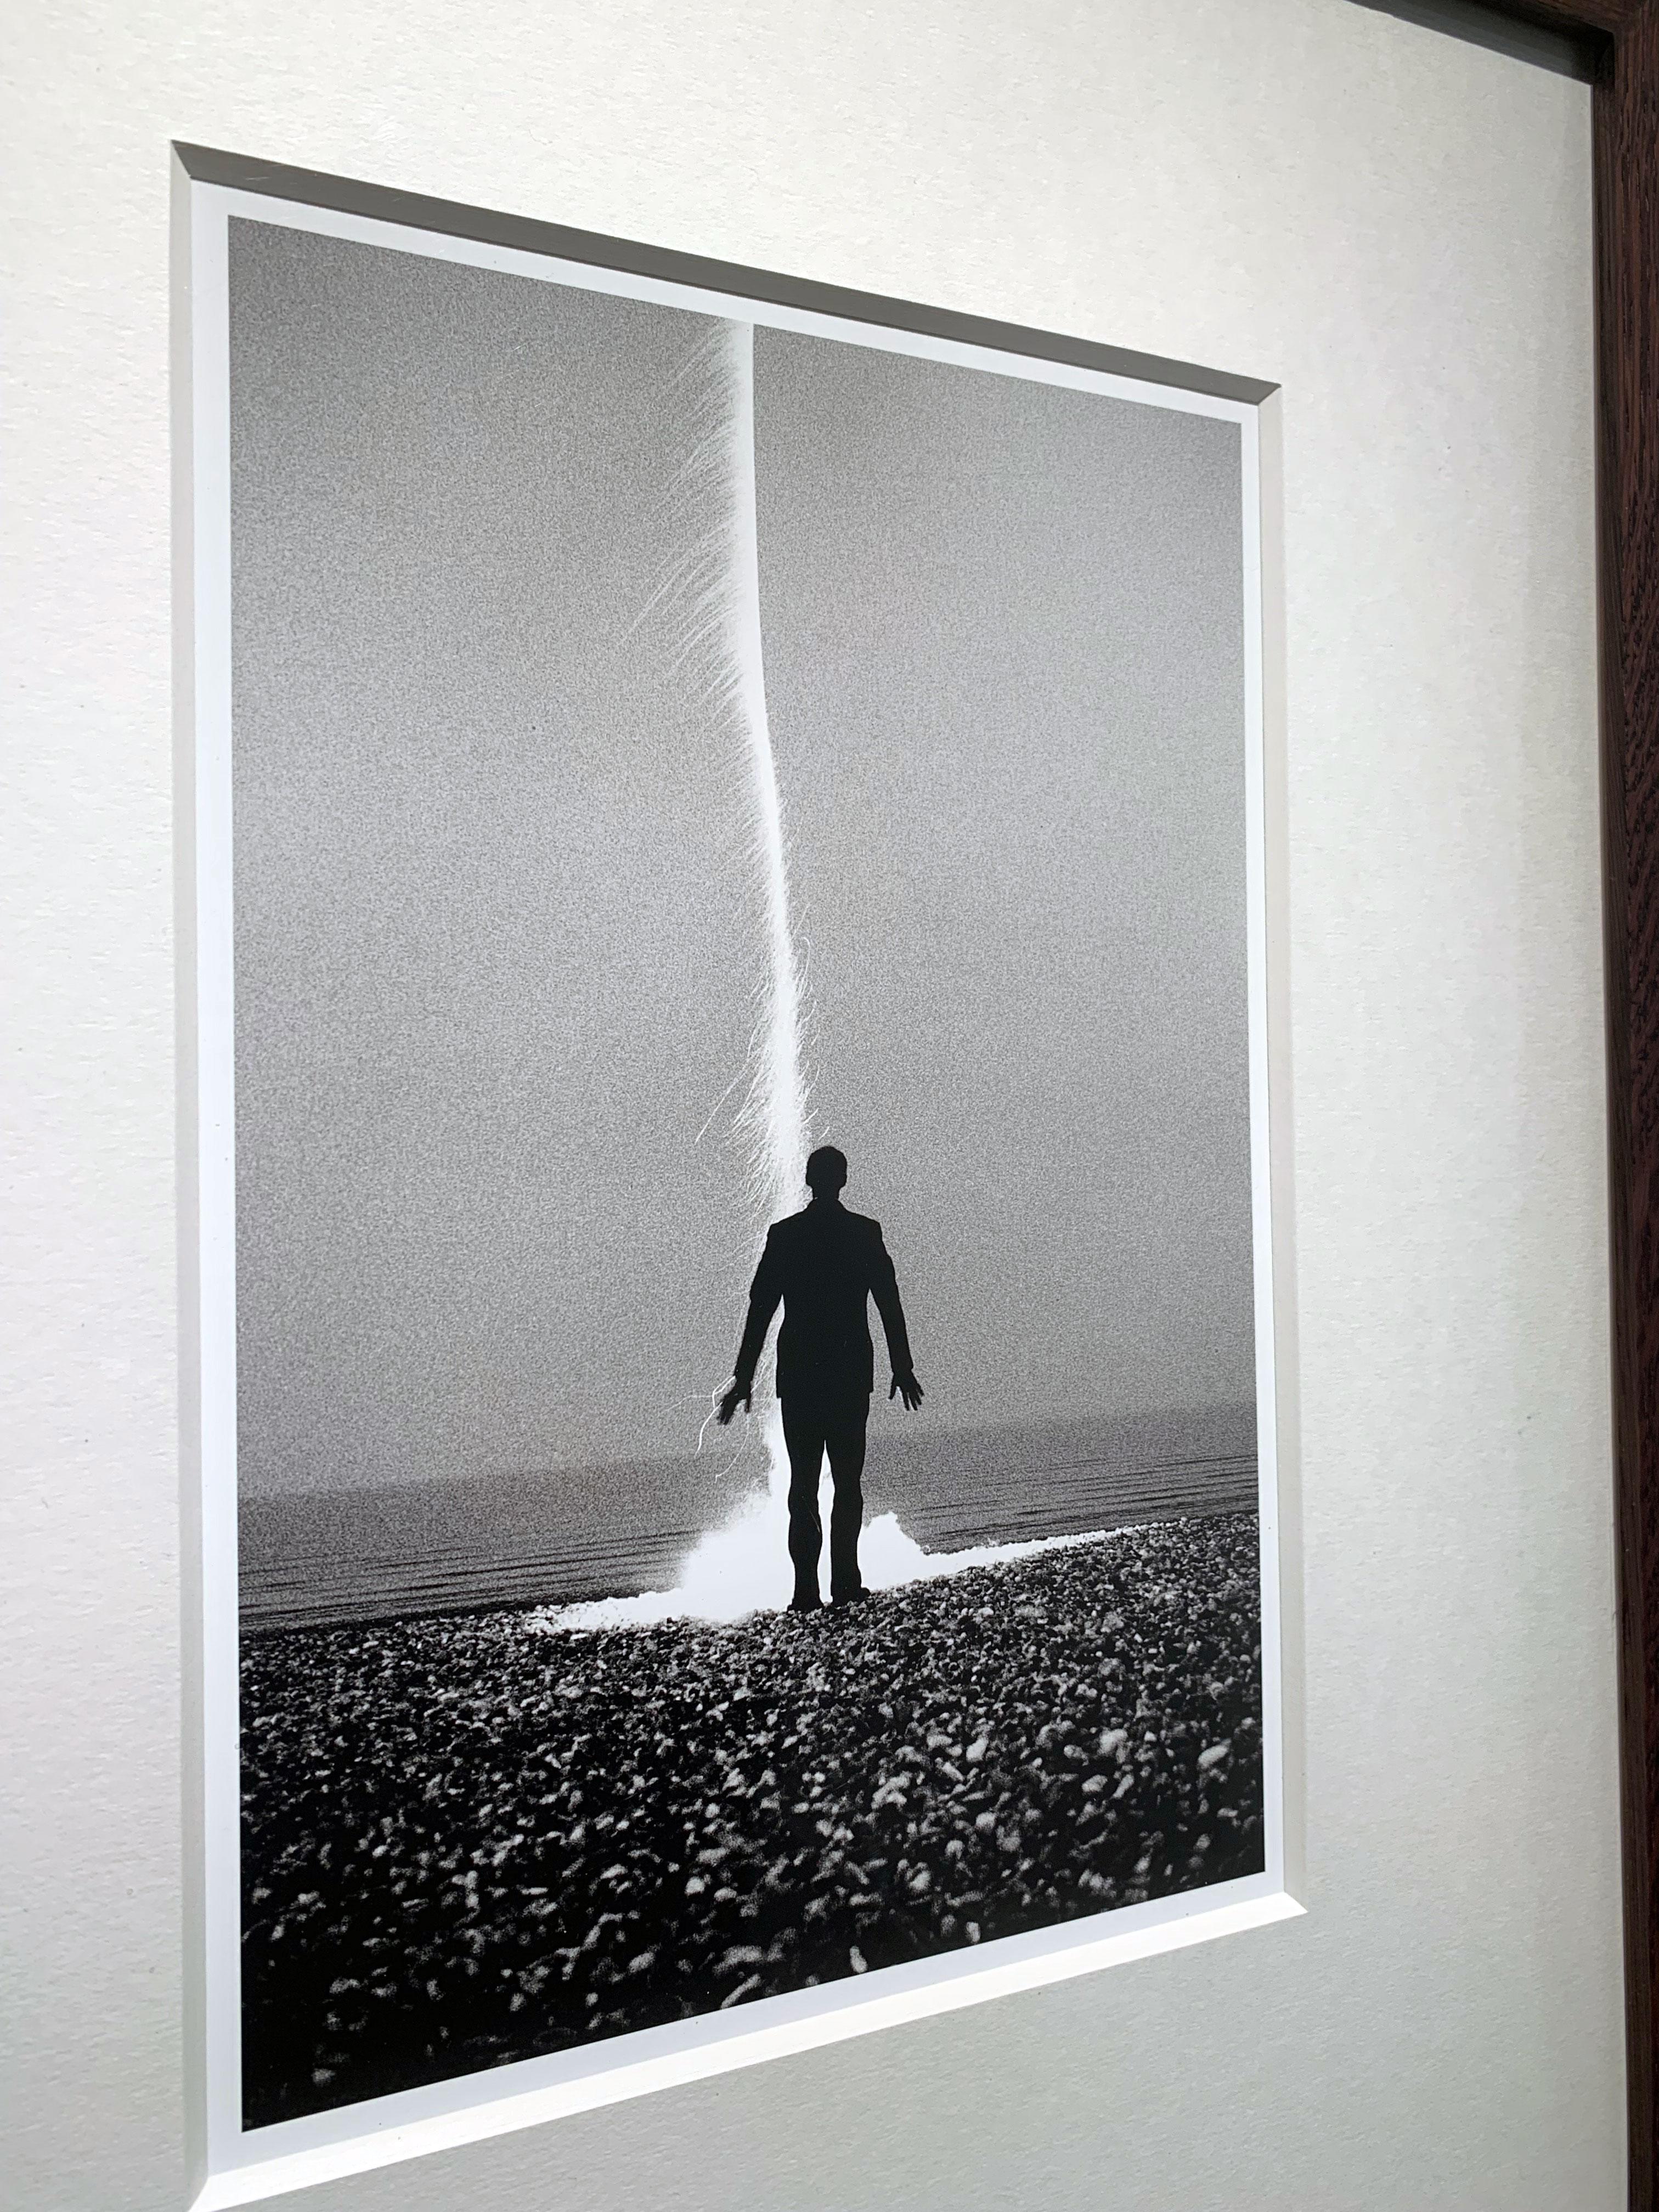 Rocket Man, Dungeness, Kent, 1979 / Howard Jones - Crossed That Line 1989 - Symbolist Photograph by Brian Griffin